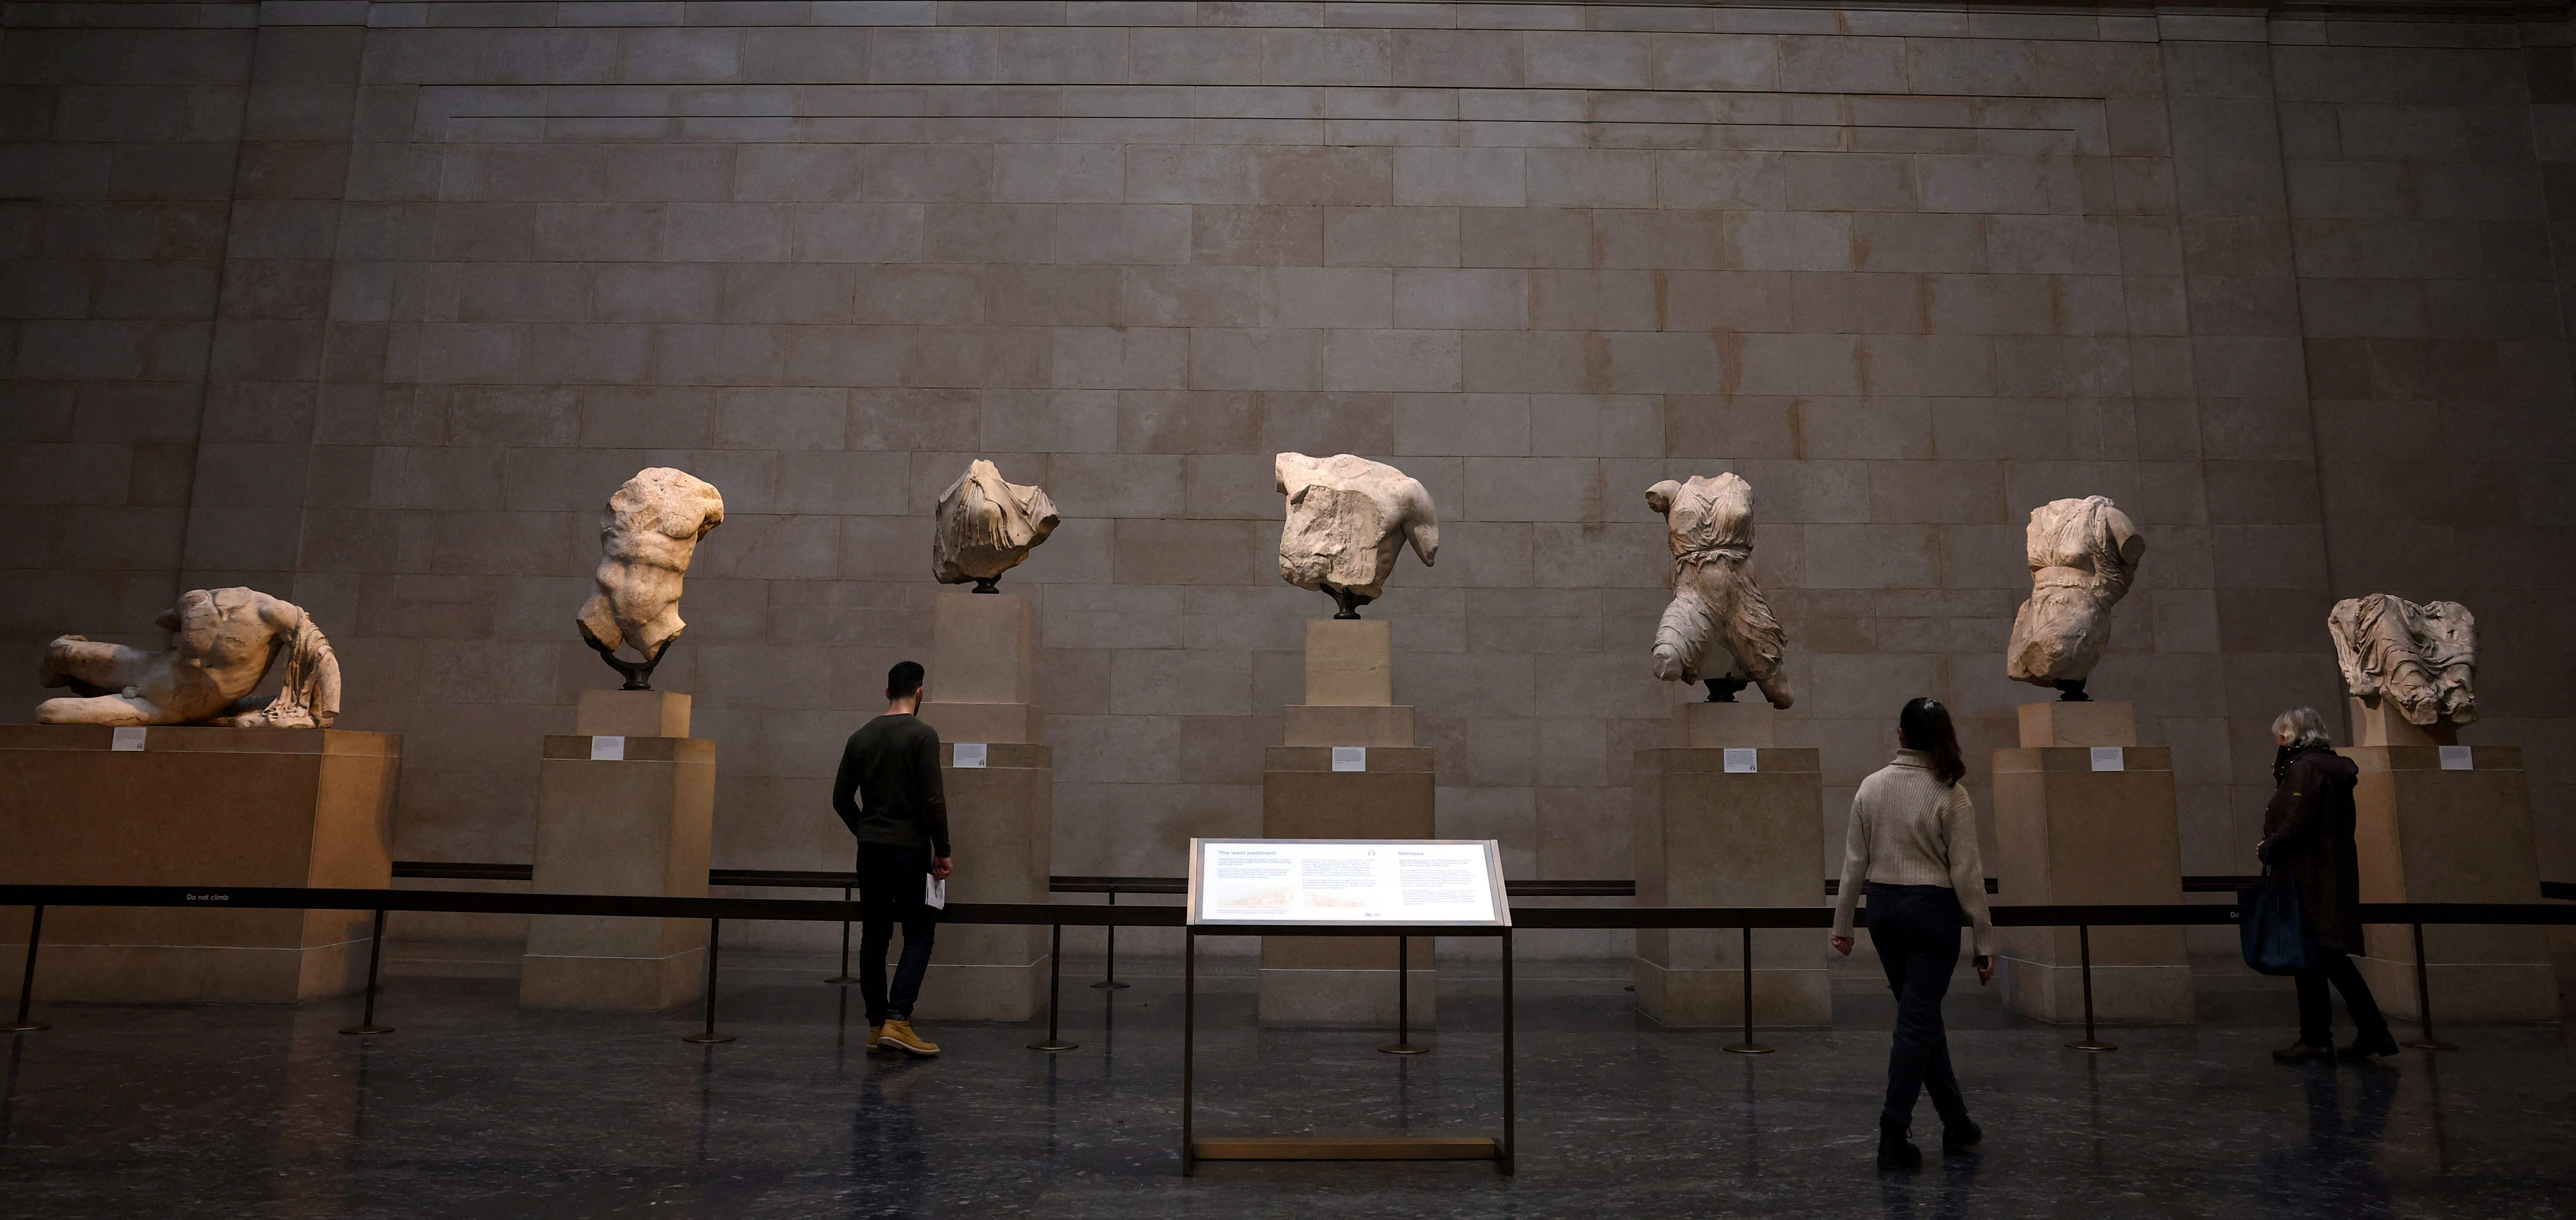 The Parthenon Sculptures are on display in the British Museum